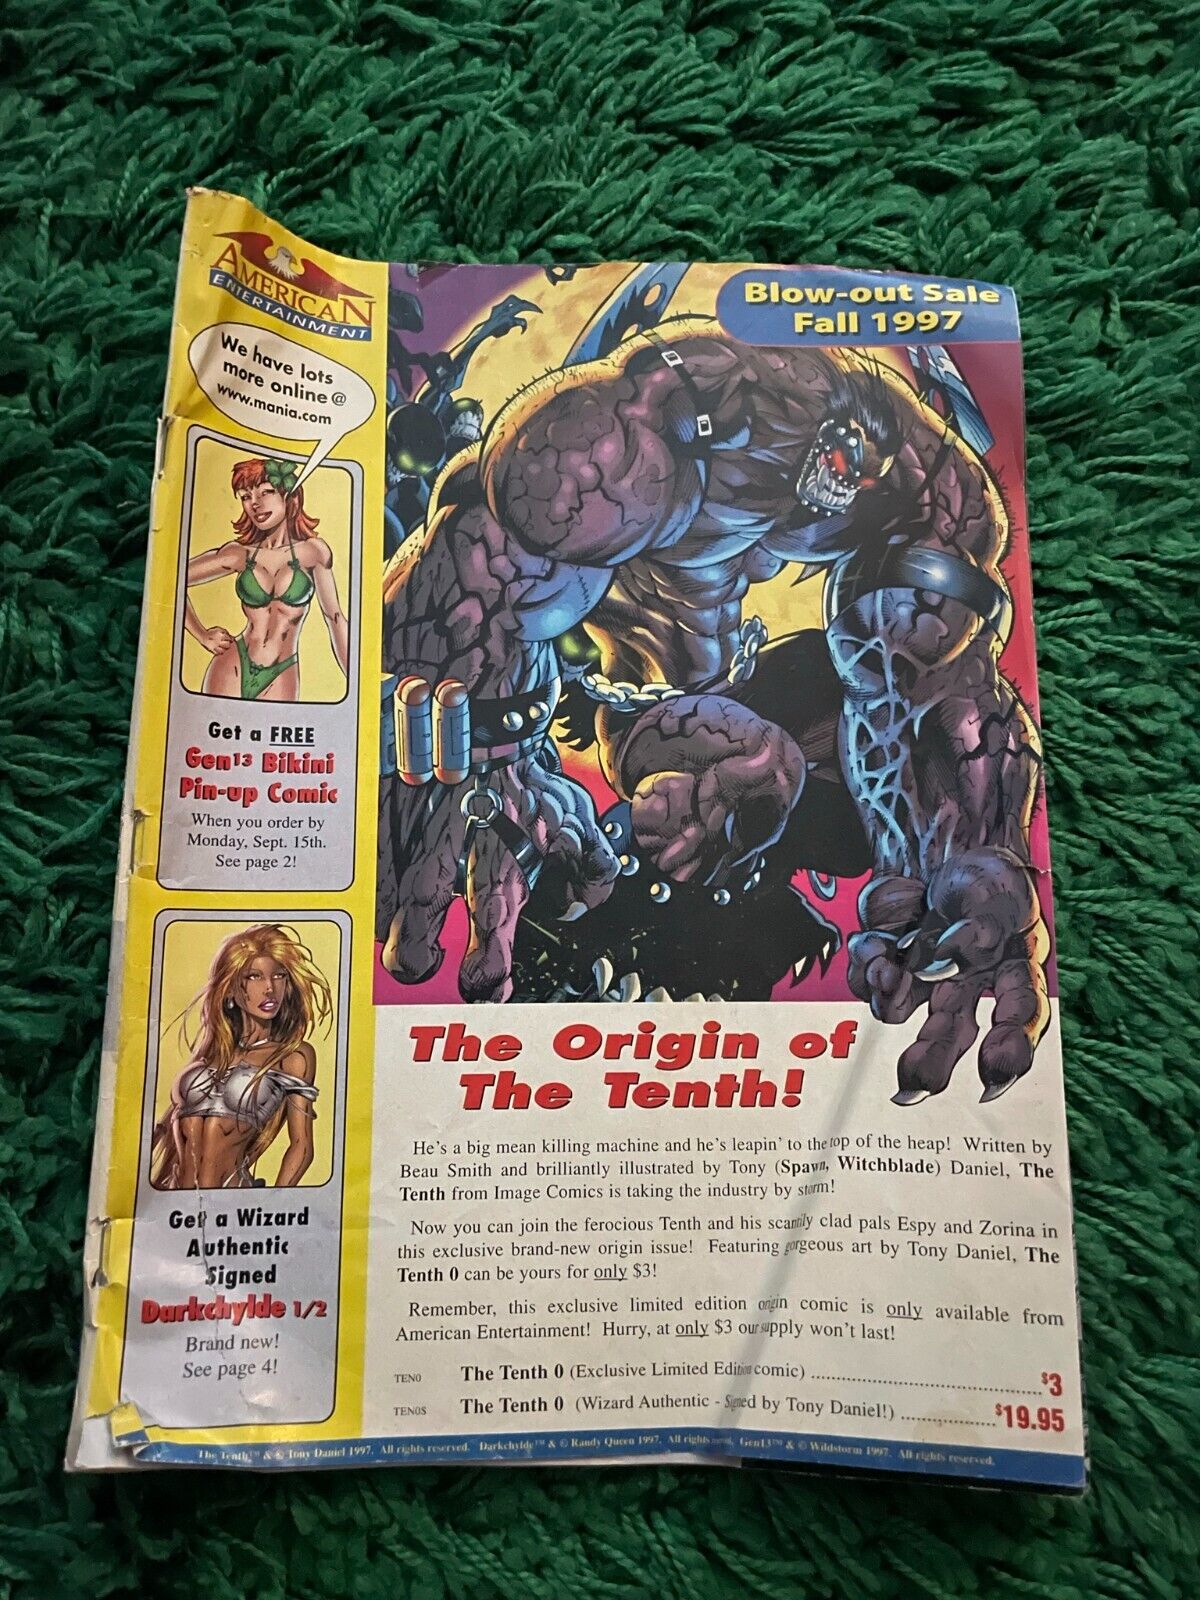 1997 Vintage Blow Out Sale Toys Toy Magazine Advertisment VTG 90s OS